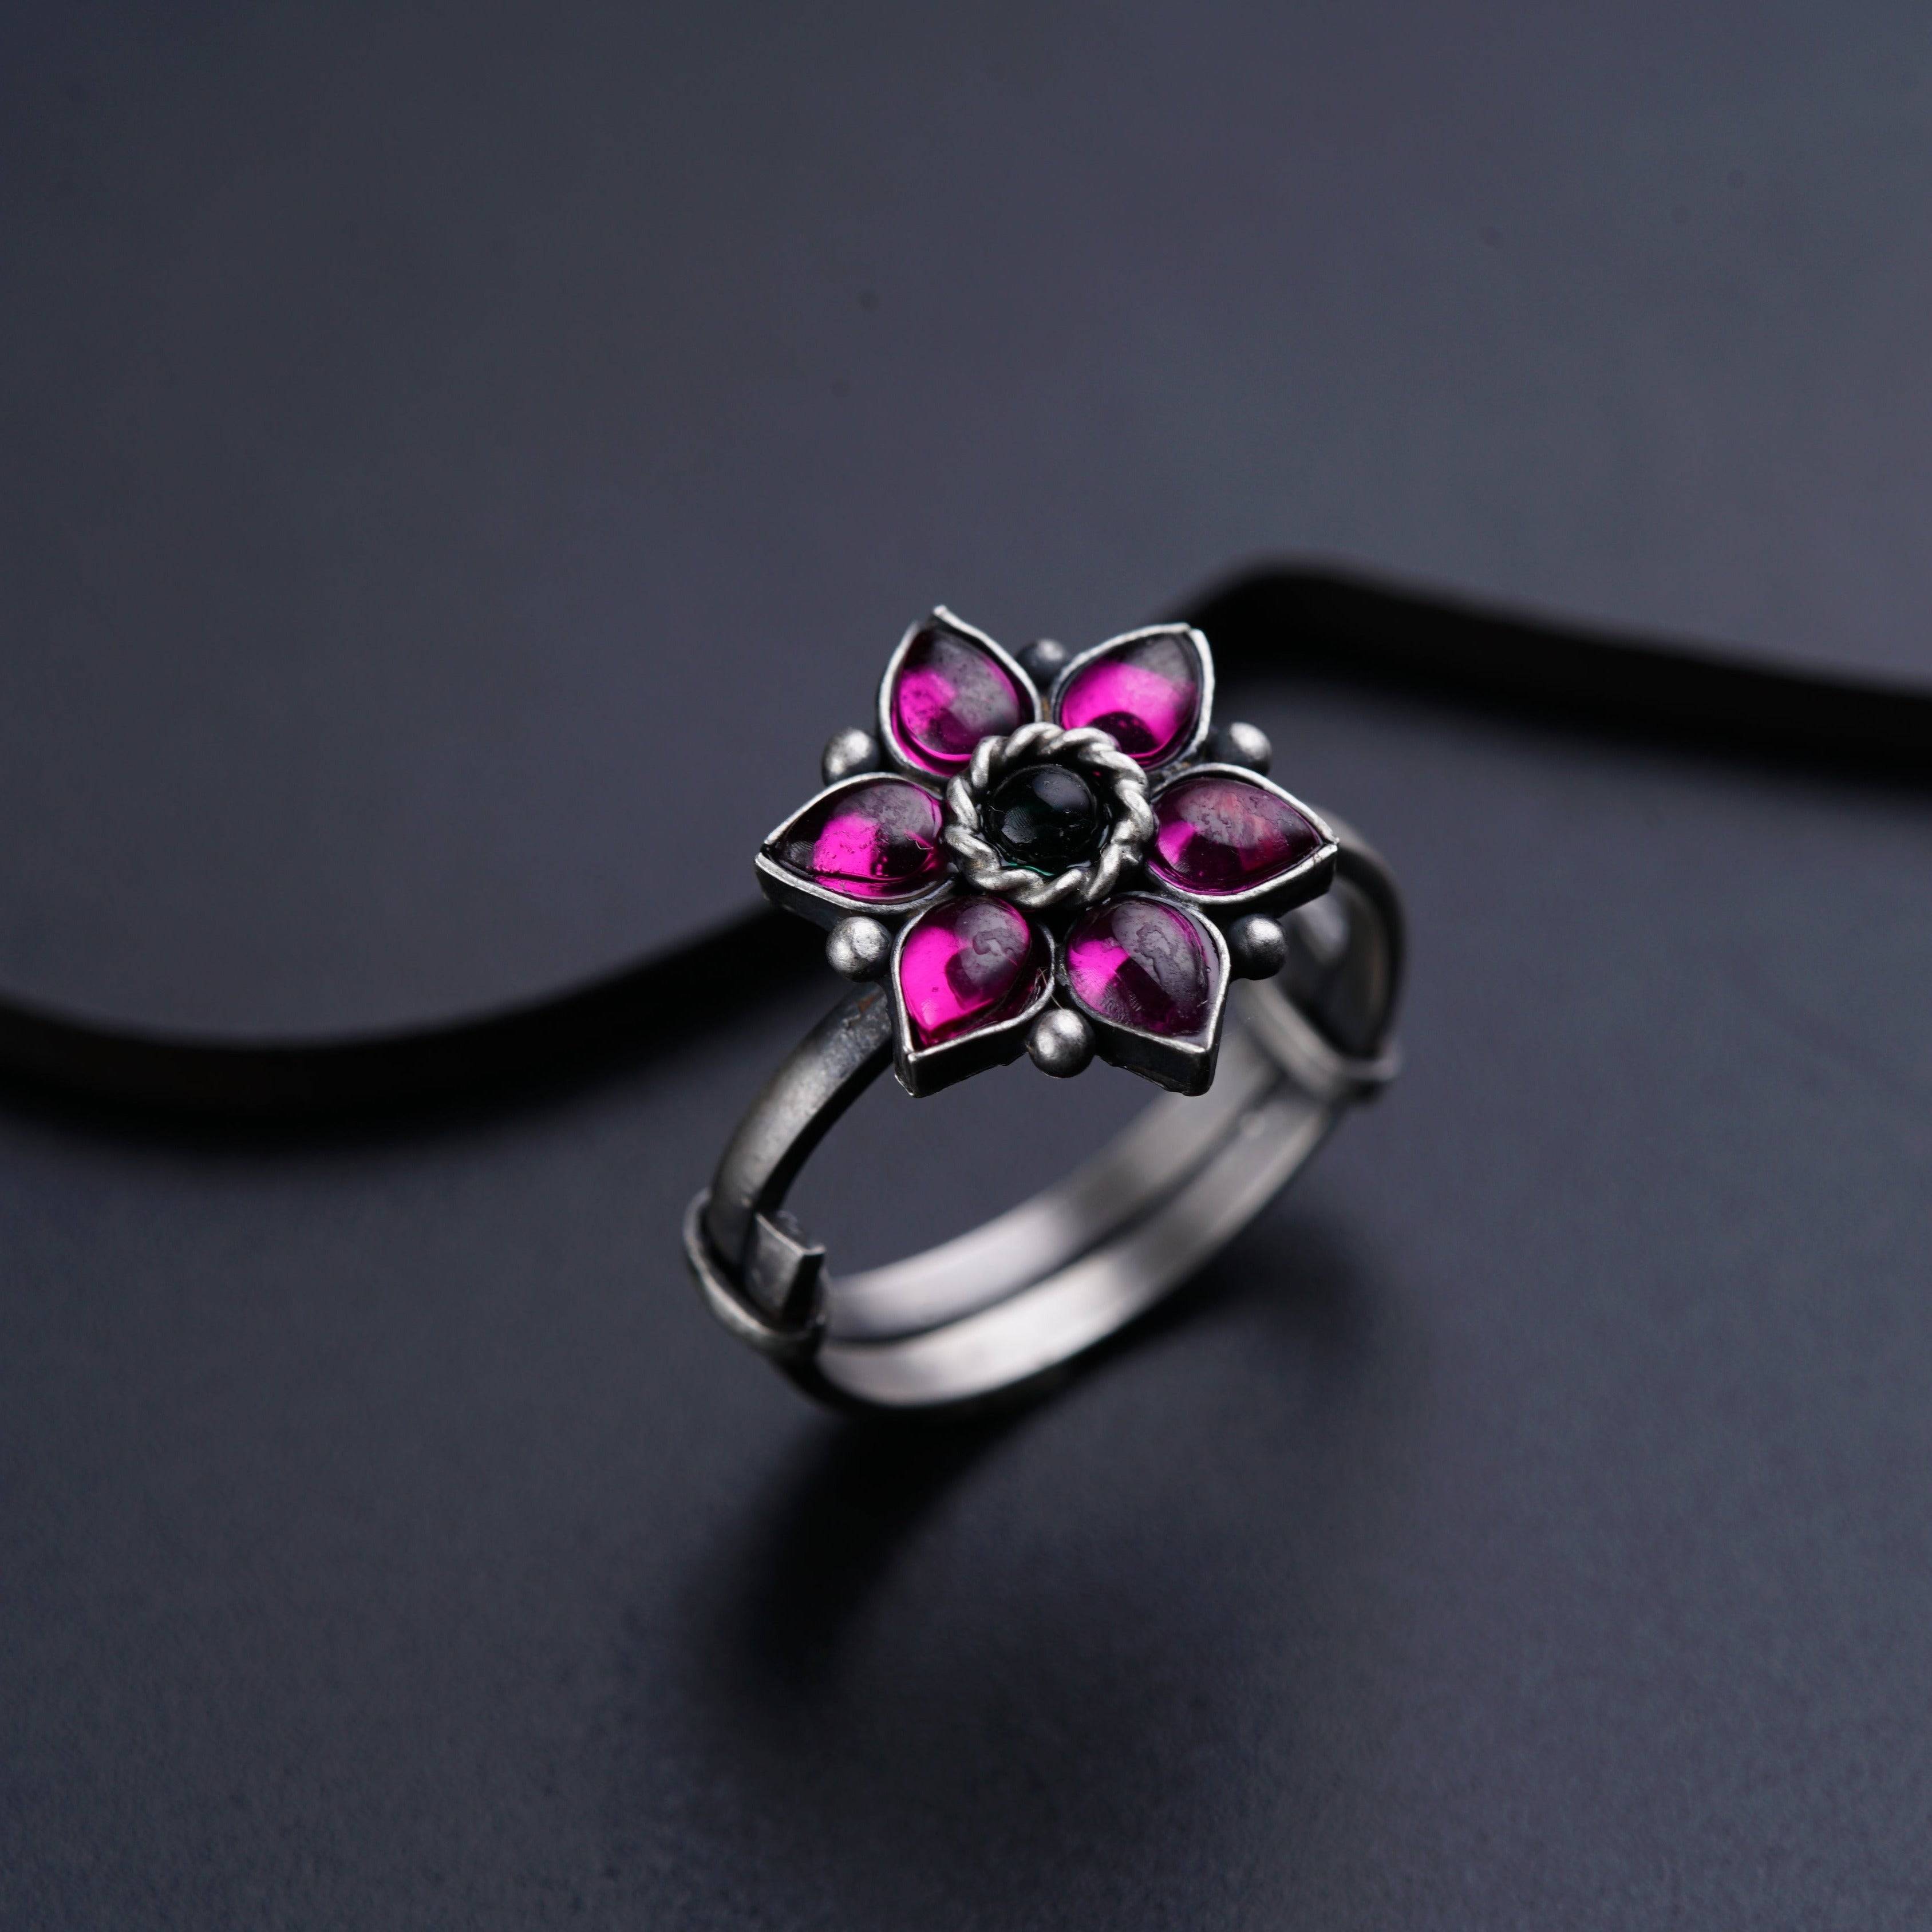 a silver ring with a pink flower on it